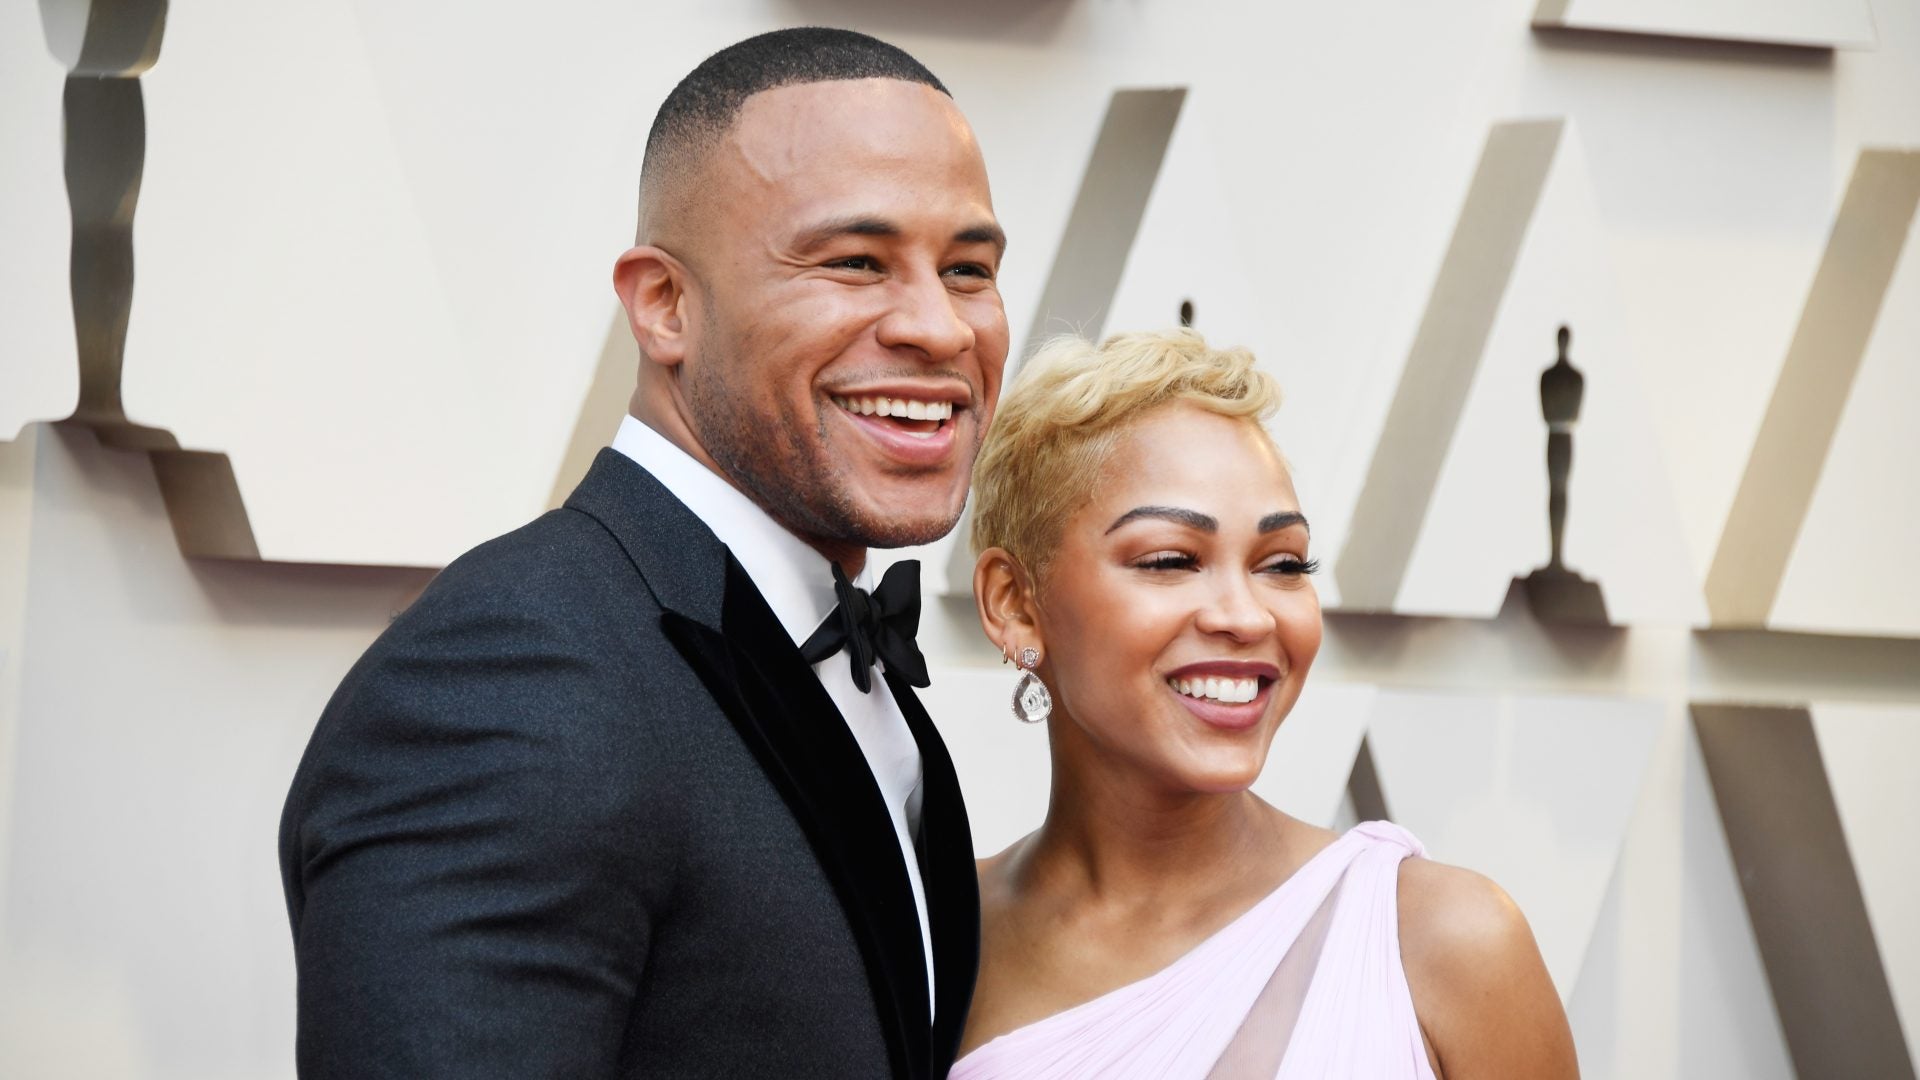 DeVon Franklin Says Breakup With Meagan Good Shook His ‘Belief System’ 